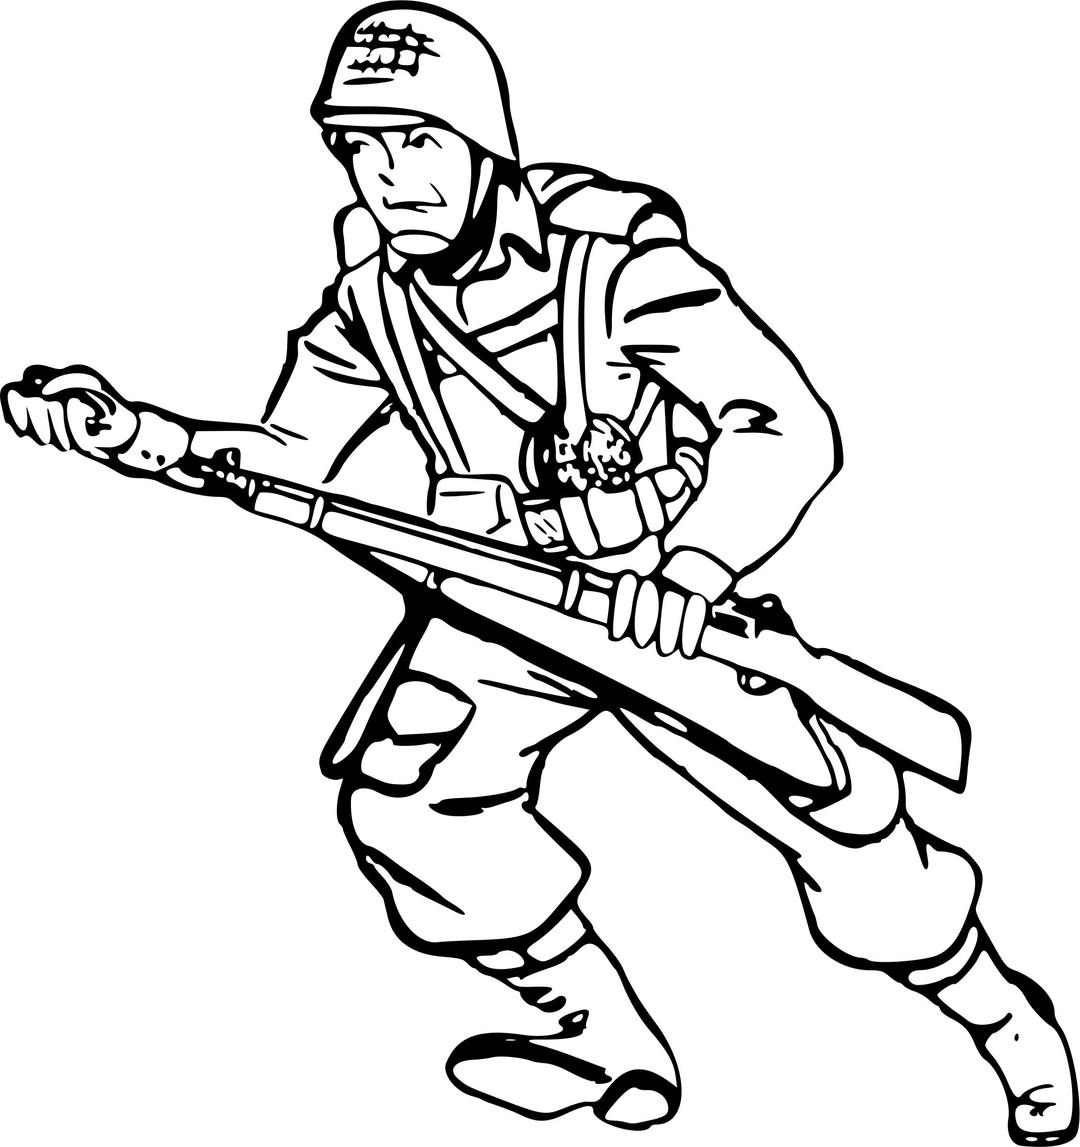 Soldier charging png transparent